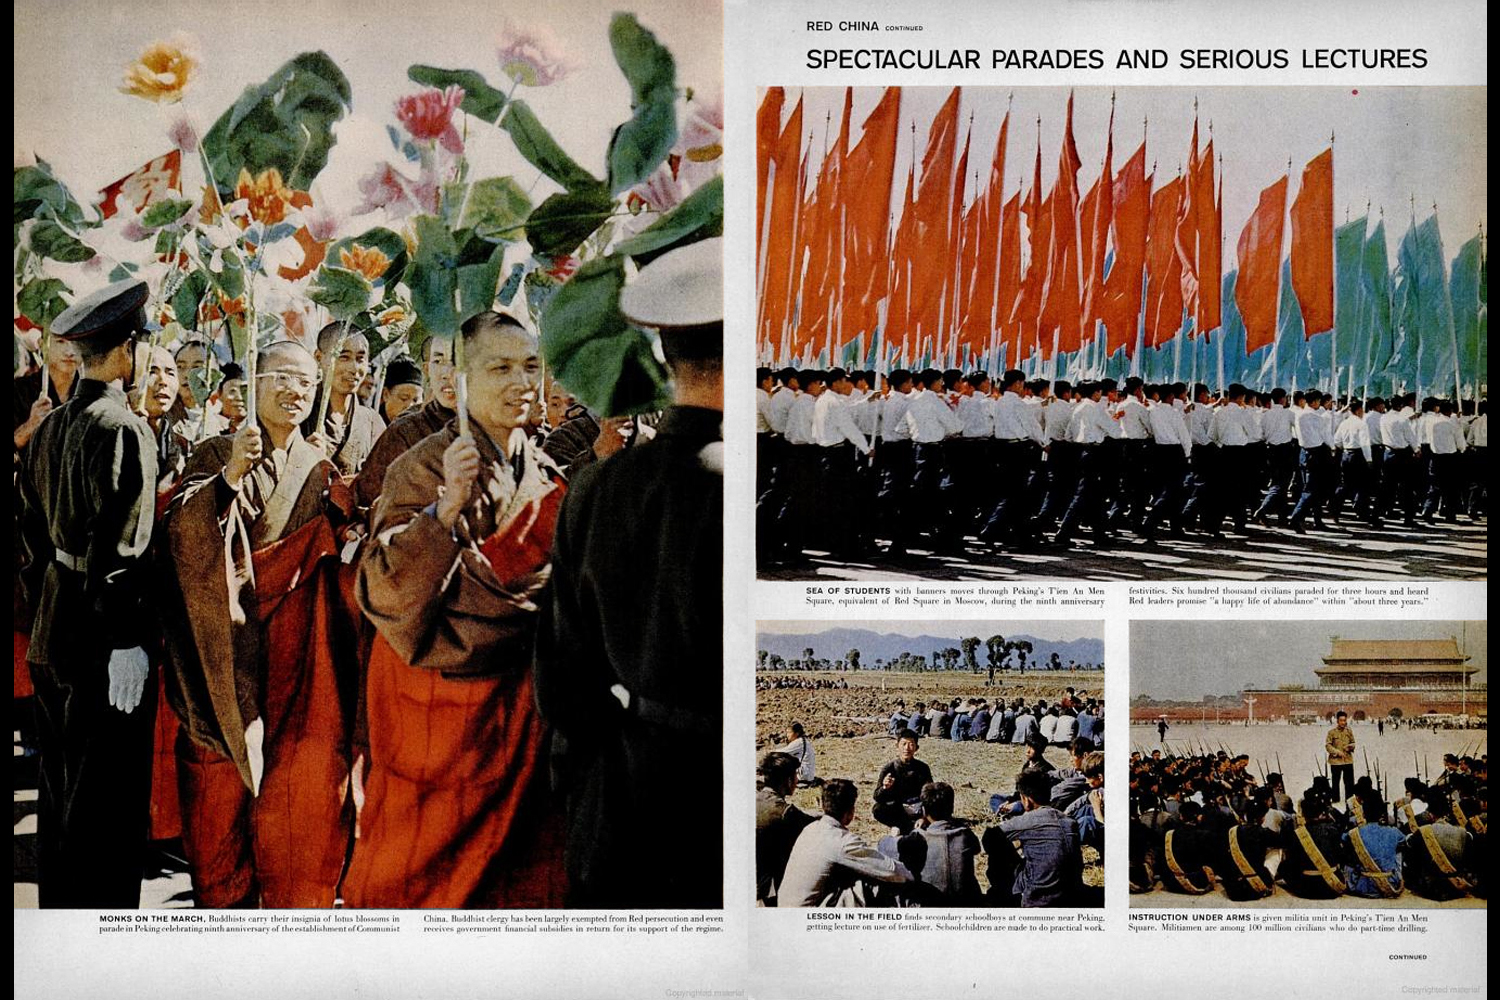 Pages from "Red China Bid for a Future," featuring photographs by Henri Cartier-Bresson, as the article appeared in the January 5, 1959, issue of LIFE.